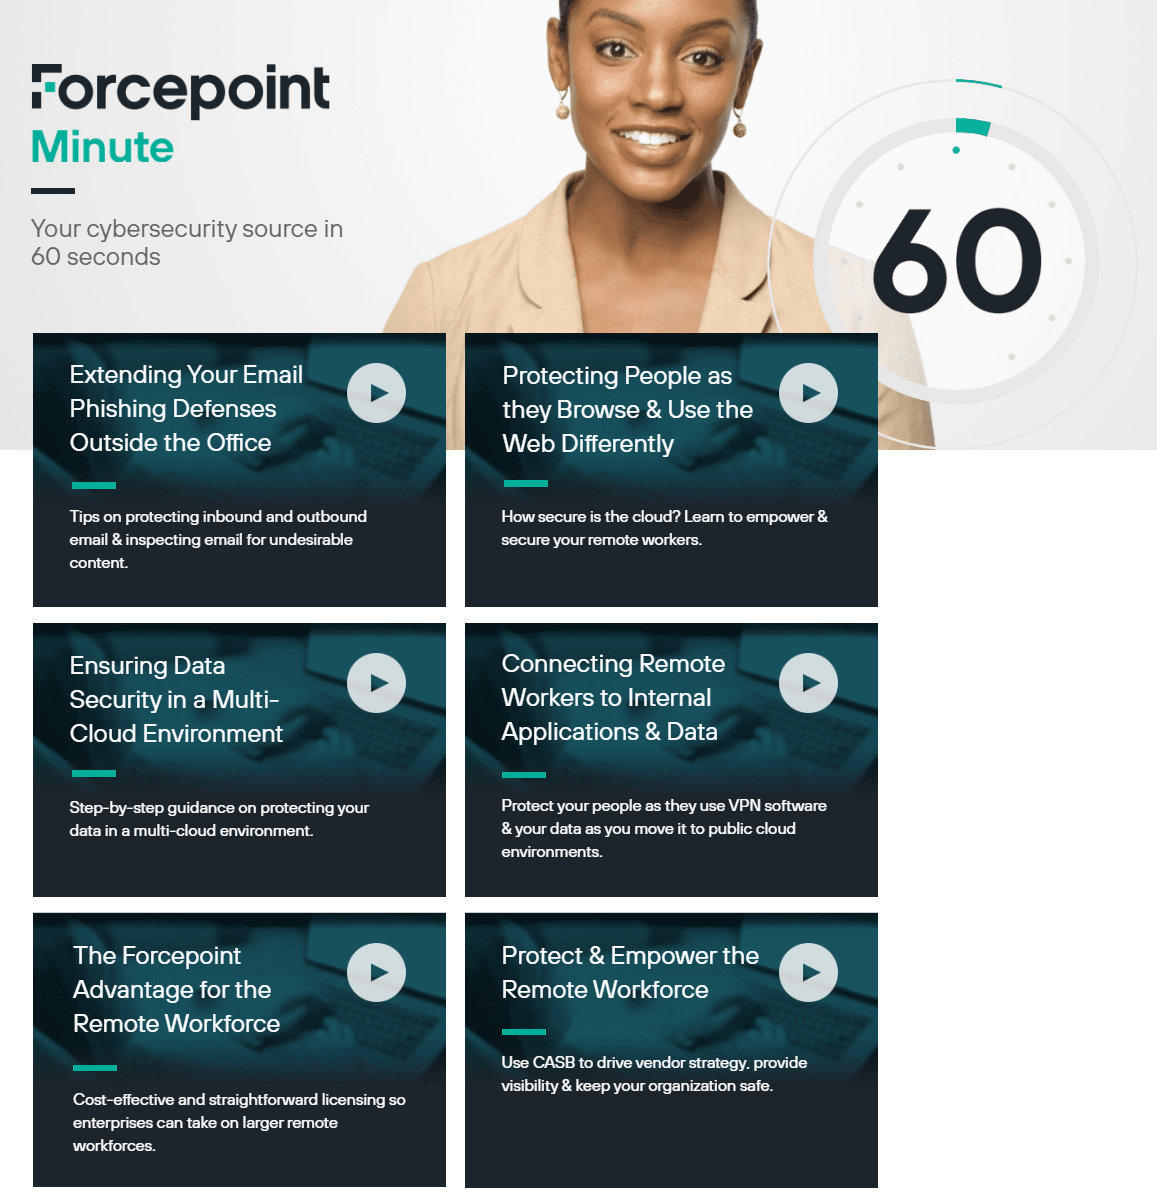 Forcepoint Minute video series on Forcepoint.com